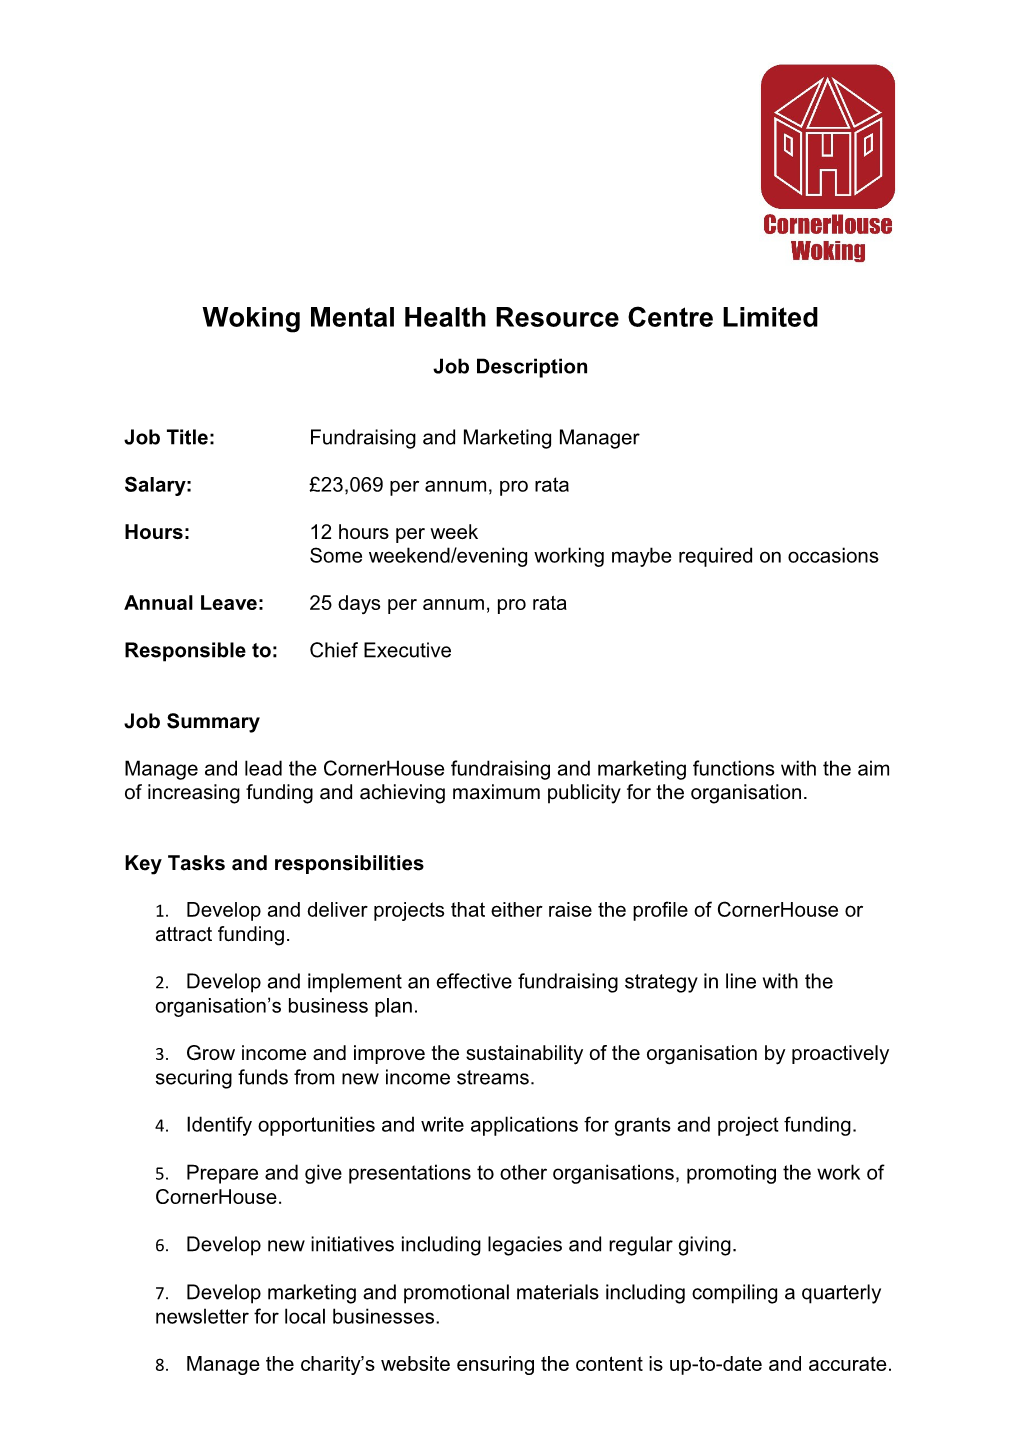 Woking Mental Health Resource Centre Limited